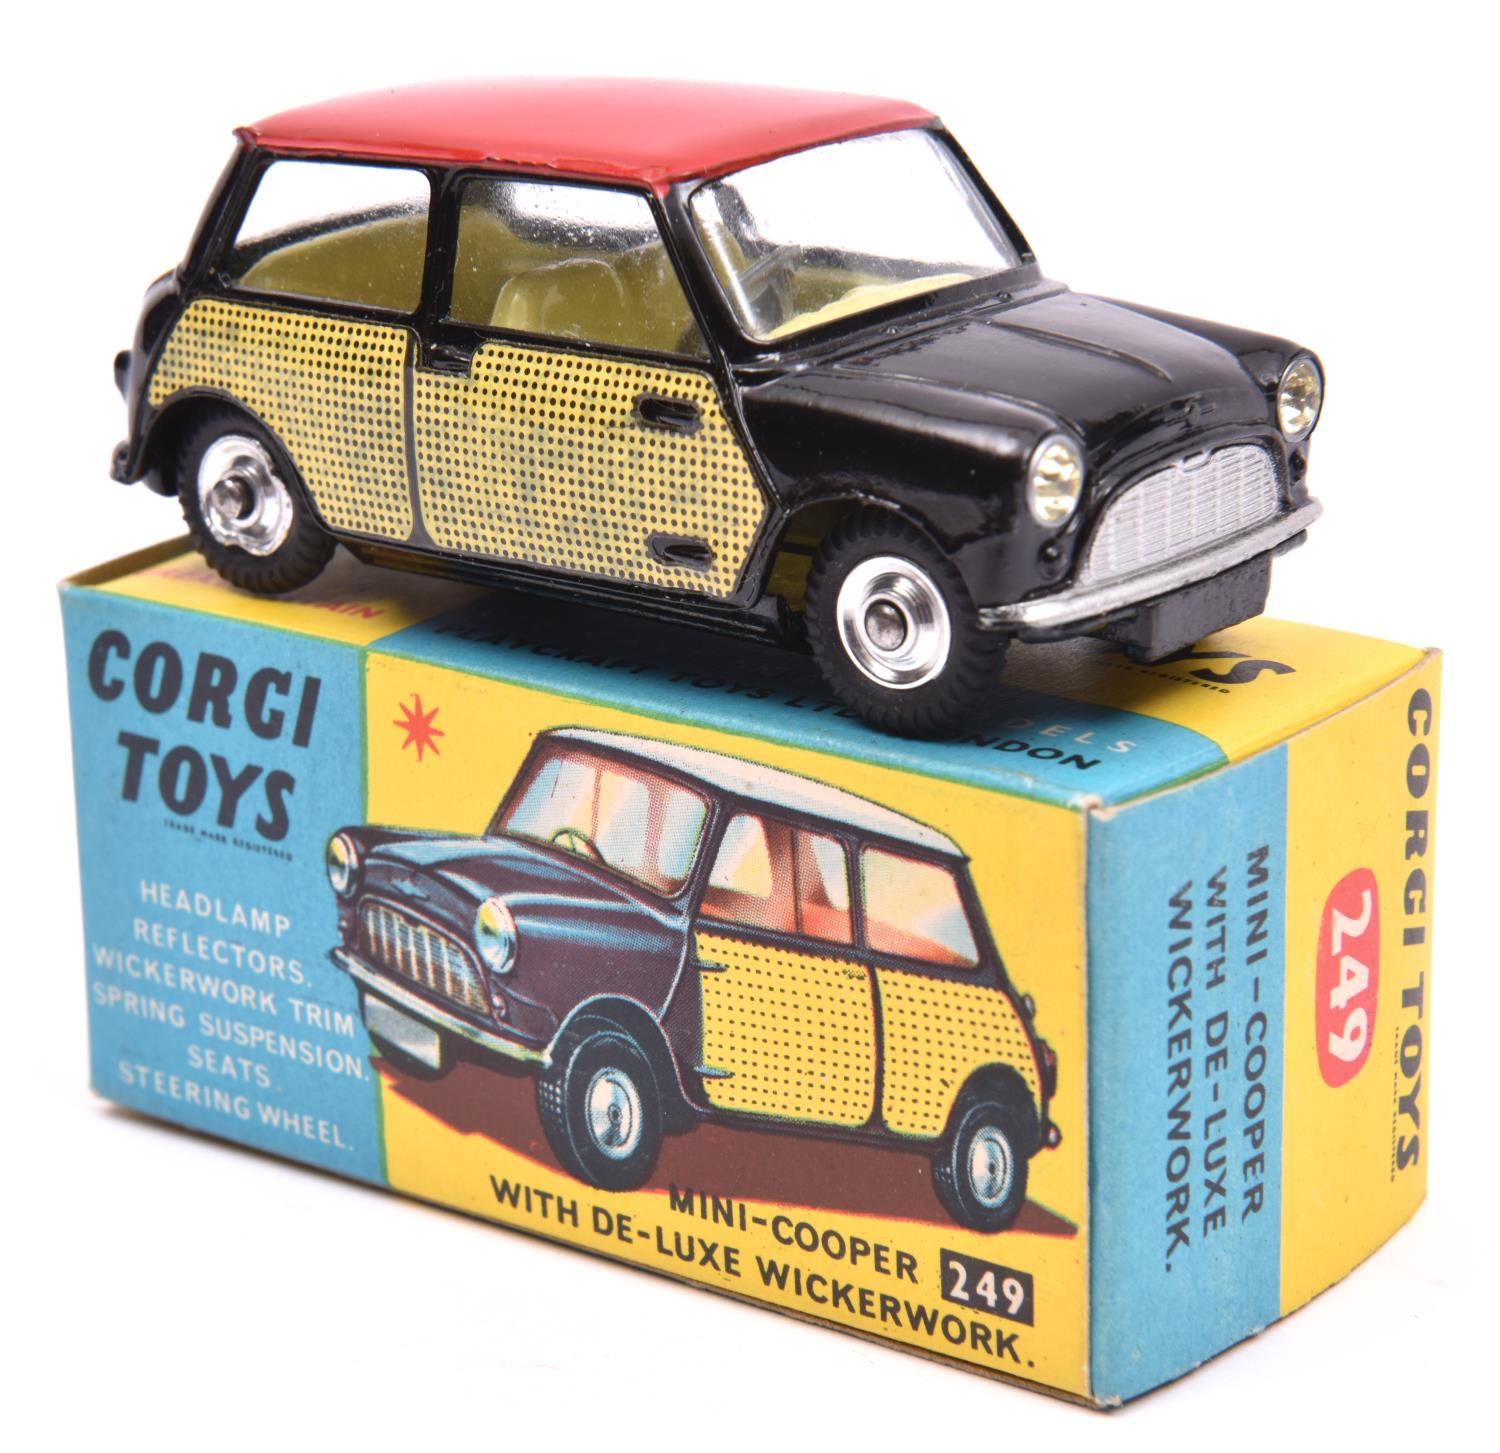 Corgi Toys Mini-Cooper with De-Luxe Wickerwork (249). In black with red roof, yellow interior,